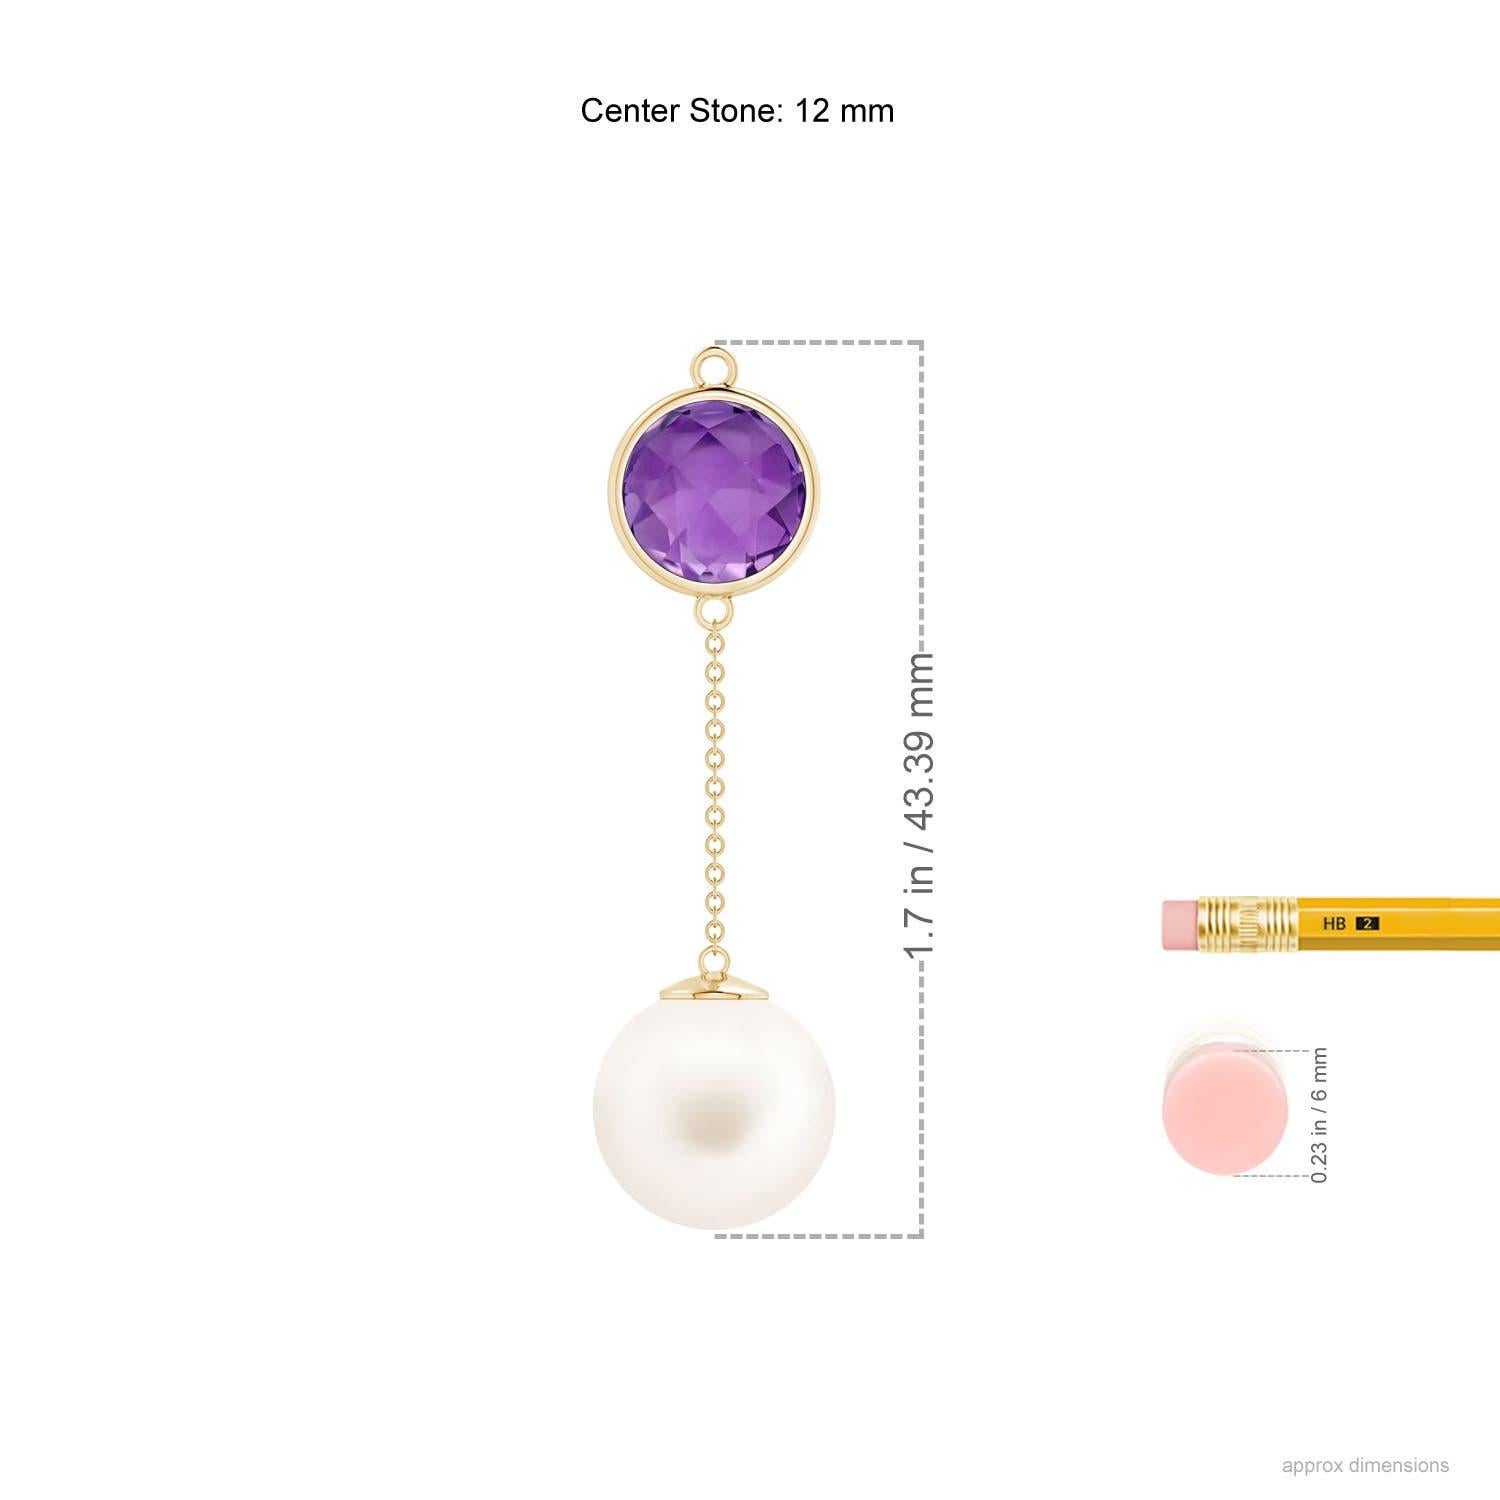 This 14k yellow gold lariat style necklace draws the eye with its simple elegance. The Freshwater cultured pearl is linked to a bezel-set deep purple amethyst by a chain, forming a stylish long drop design.
Freshwater Cultured Pearl is the